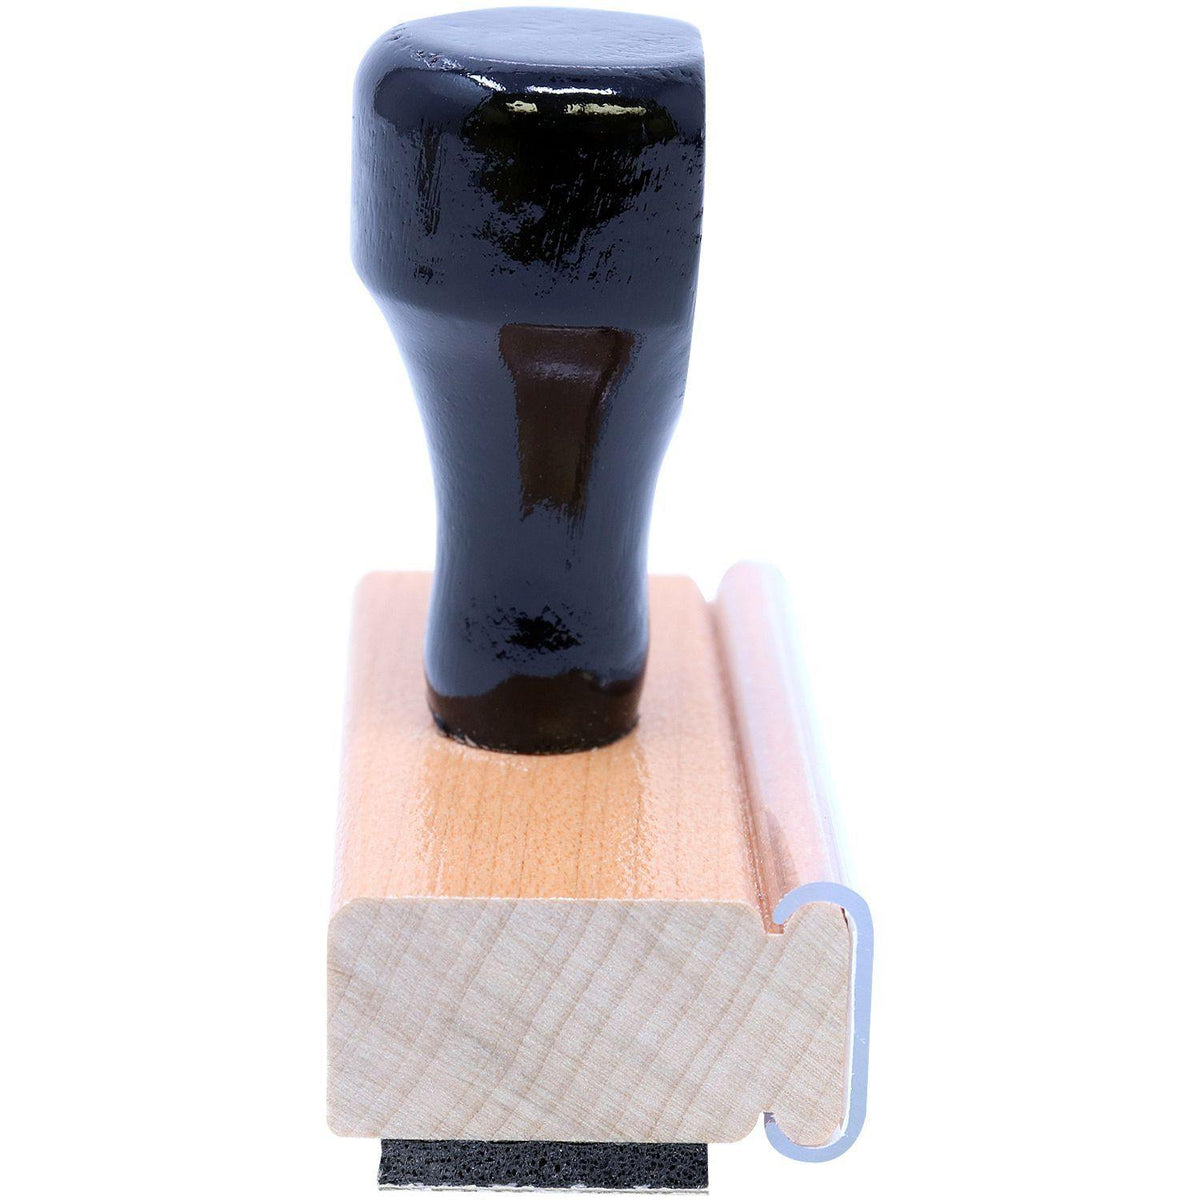 Narrow Past Due Rubber Stamp - Engineer Seal Stamps - Brand_Acorn, Impression Size_Small, Stamp Type_Regular Stamp, Type of Use_Office